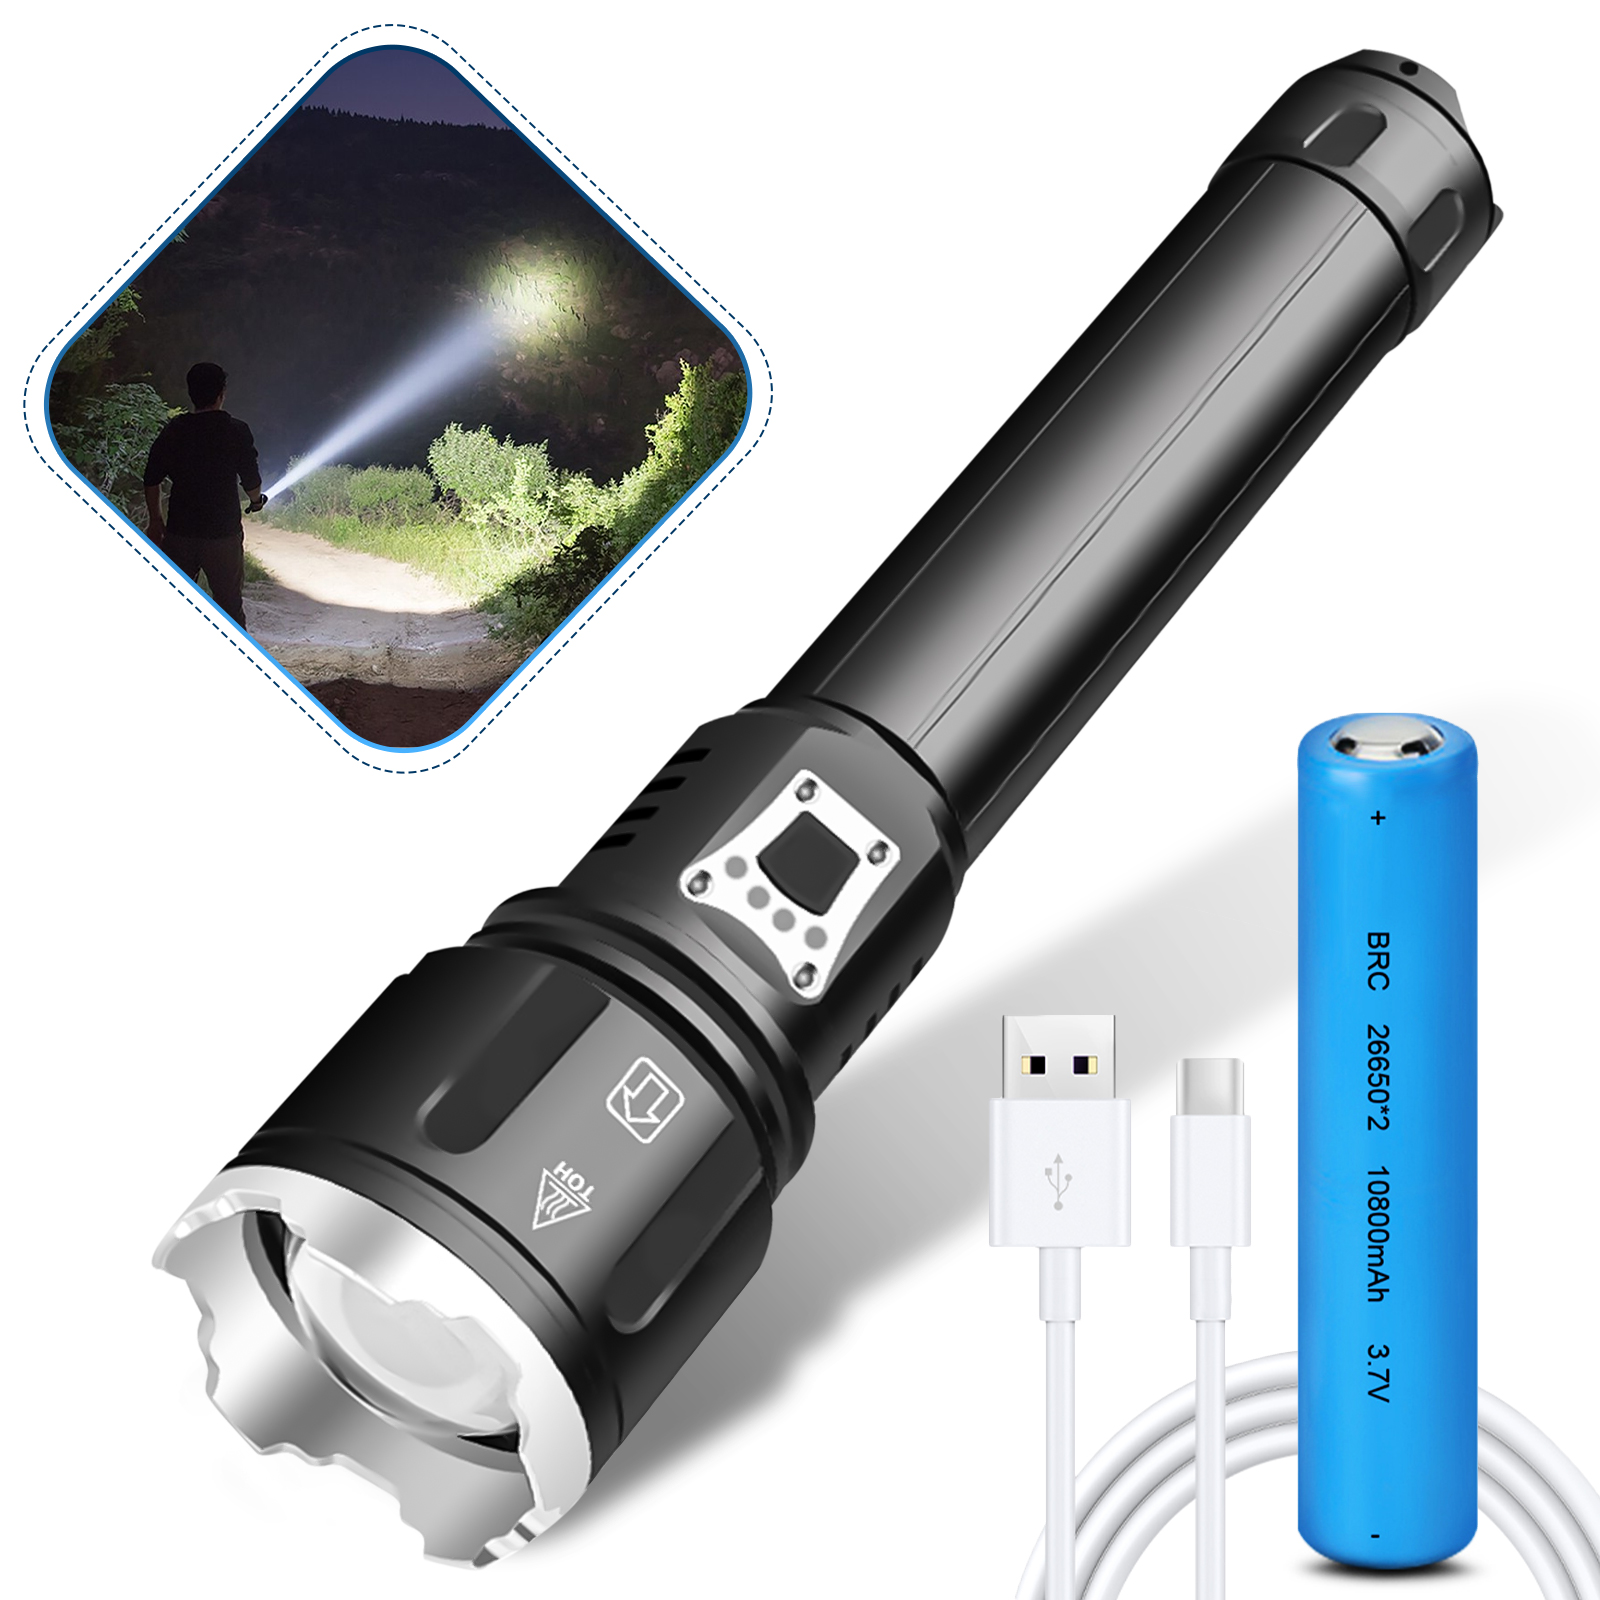 Find CHARMINER XHP70 2 LED Outdoor Emergency Rechargeable Flashlight Super Bright 90000 High Lumens Tactical Flashlight USB Power Output Handheld Camping Flash light Zoomable IPX5 Water Resistant for Sale on Gipsybee.com with cryptocurrencies